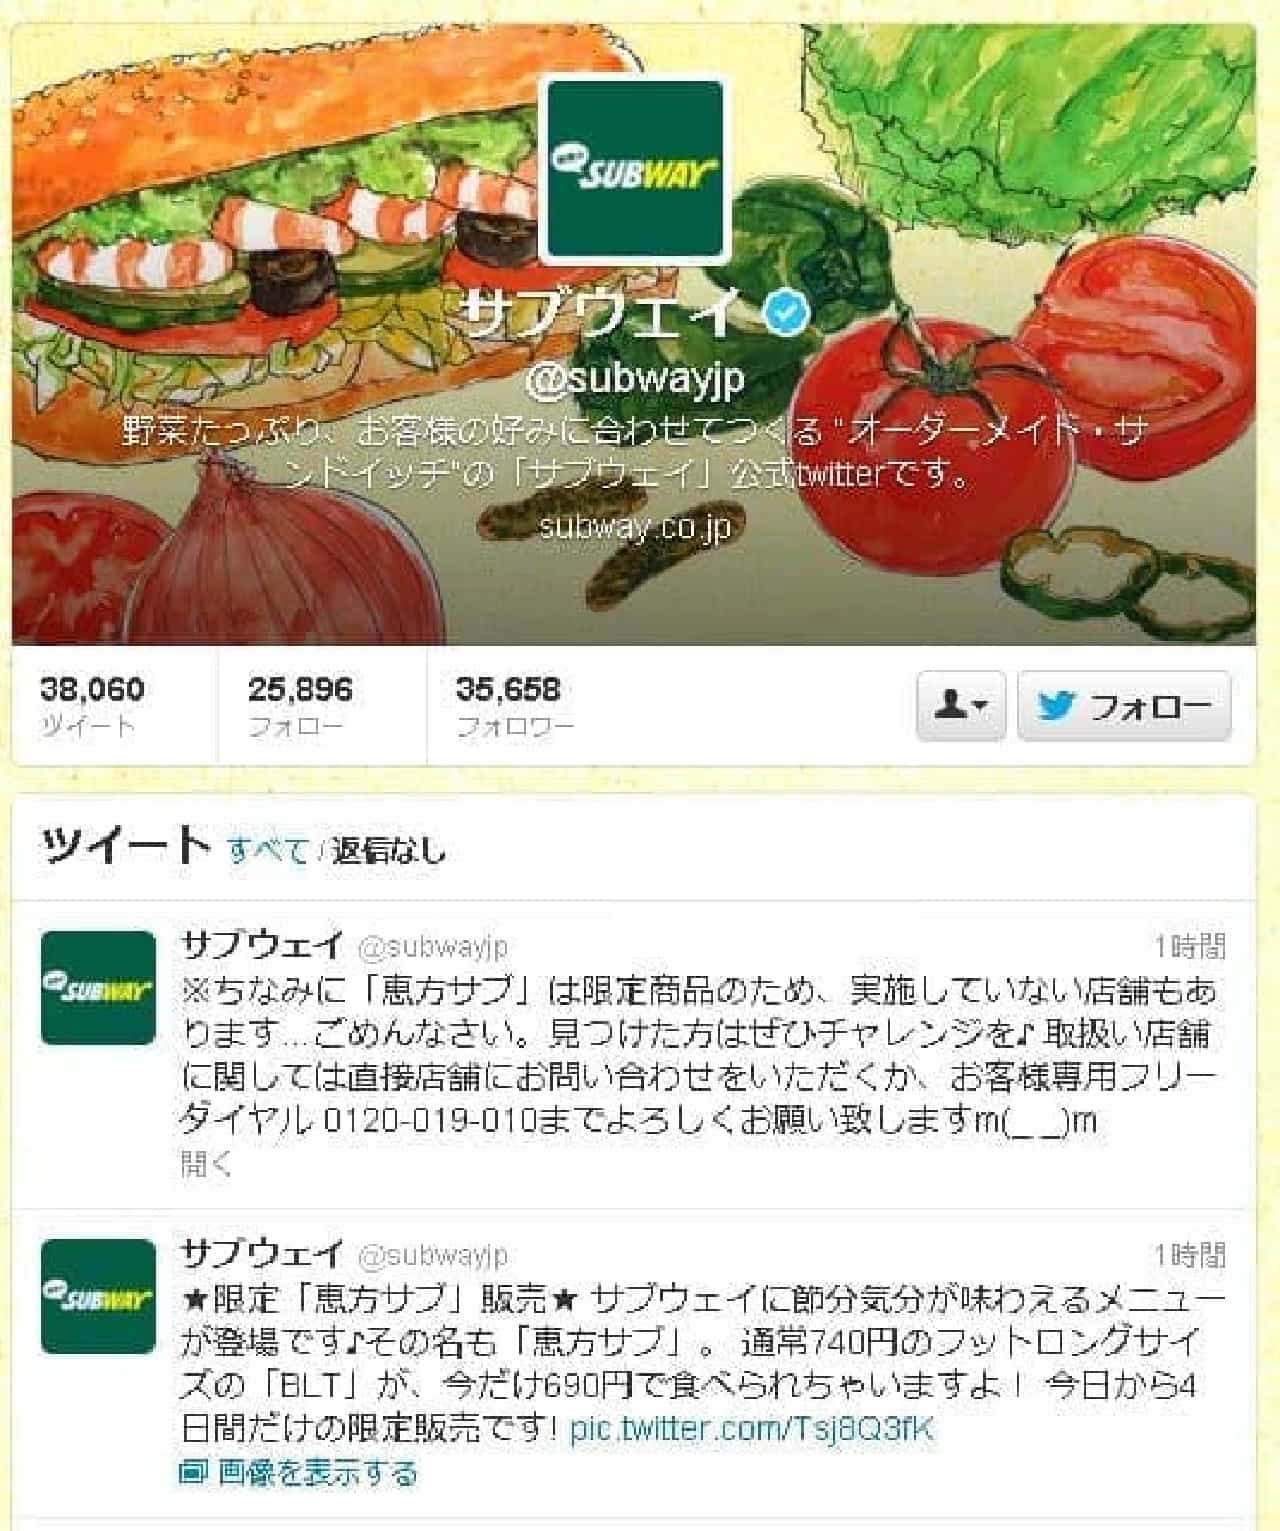 Subway Official Twitter Announcement of Ehomaki Release